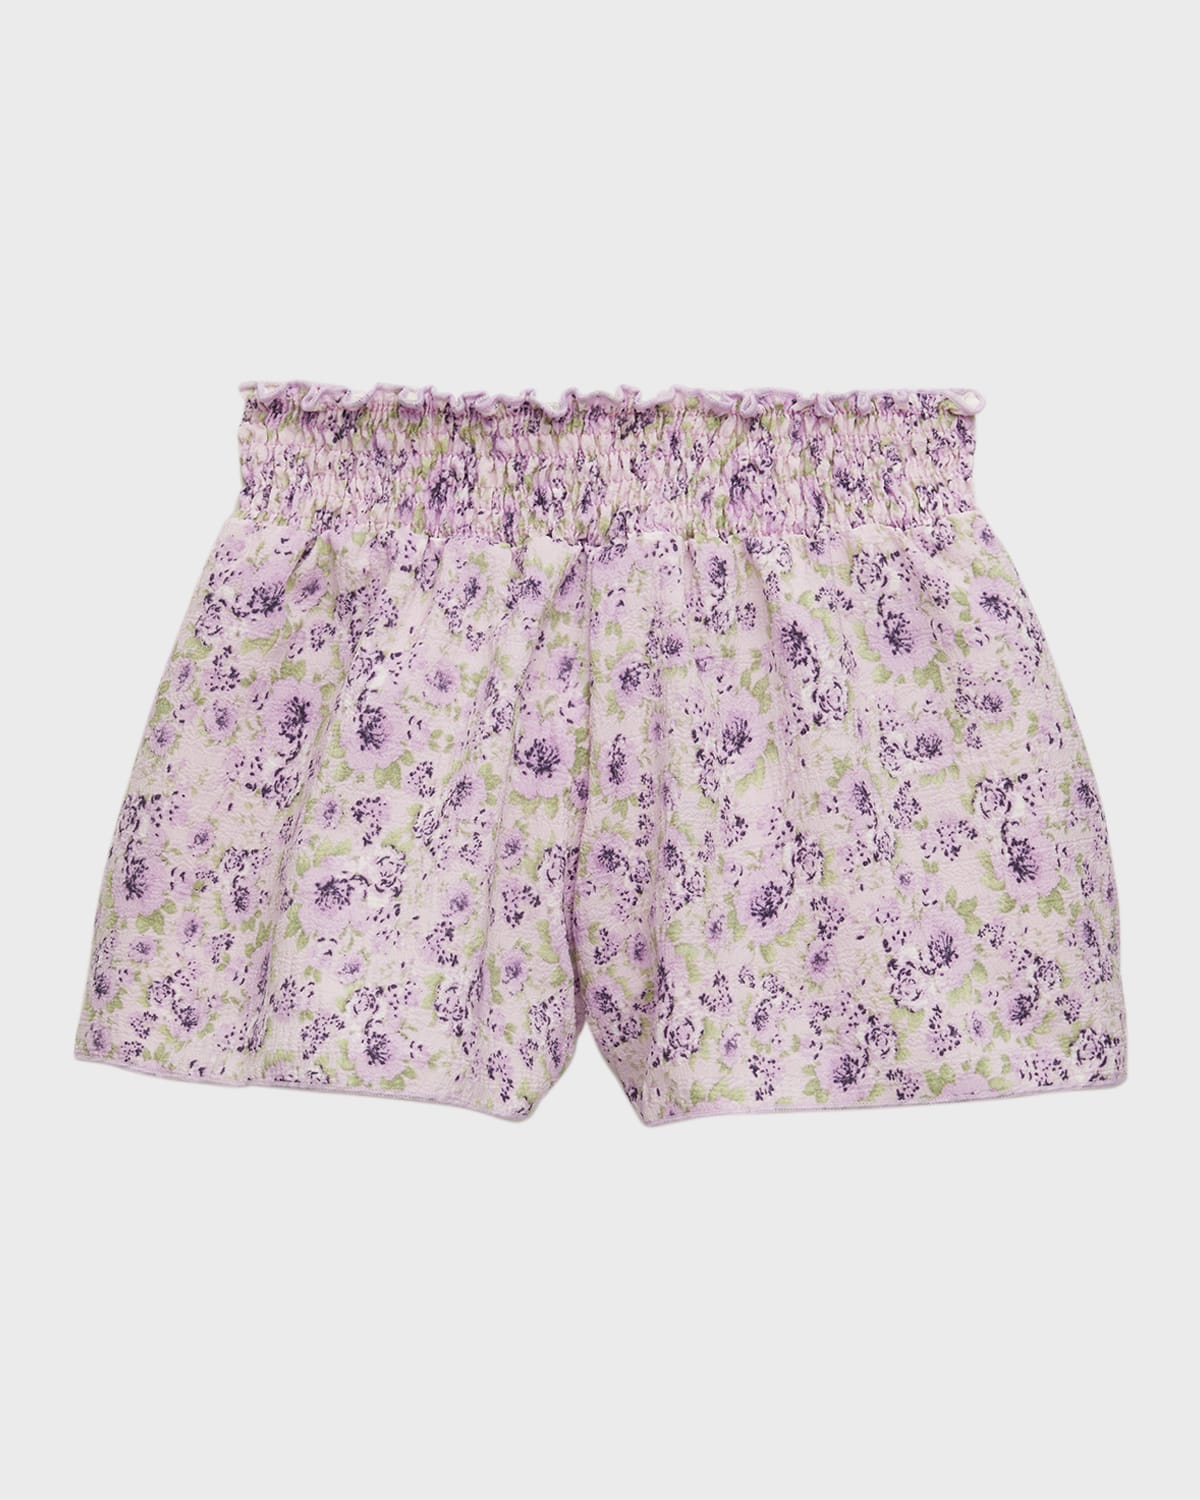 Girl's Lilac-Print Smocked Shorts, Size S-XL